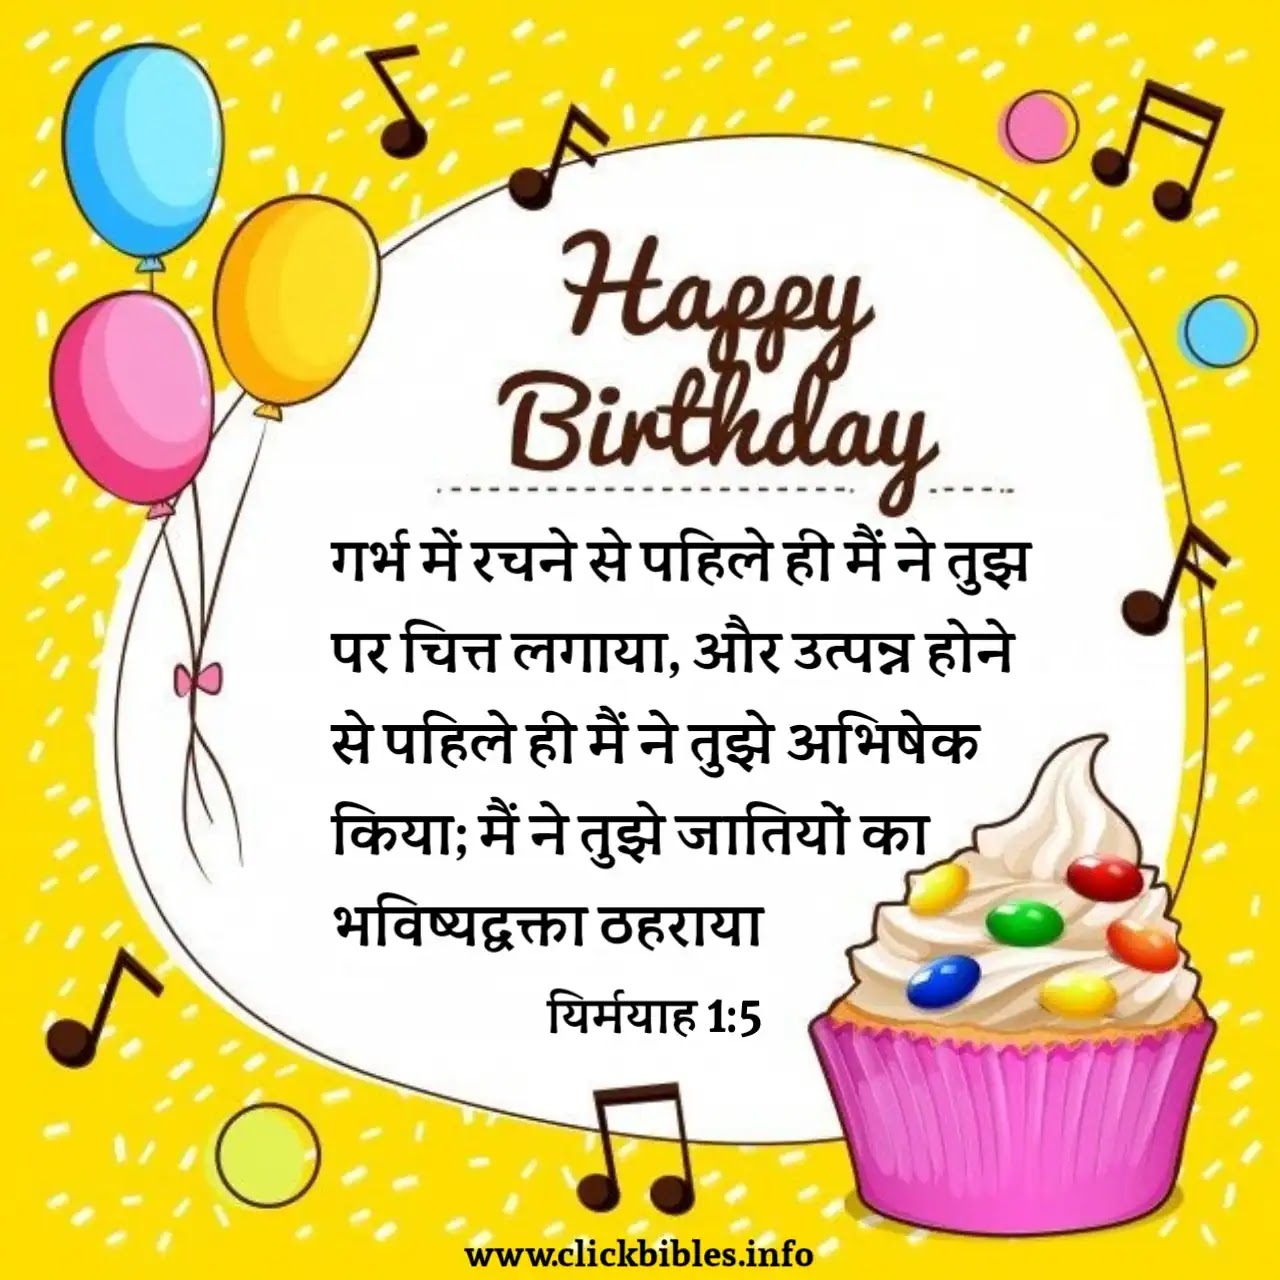 Happy Birthday Wishes Images With Bible Verses In Hindi - Click Bible